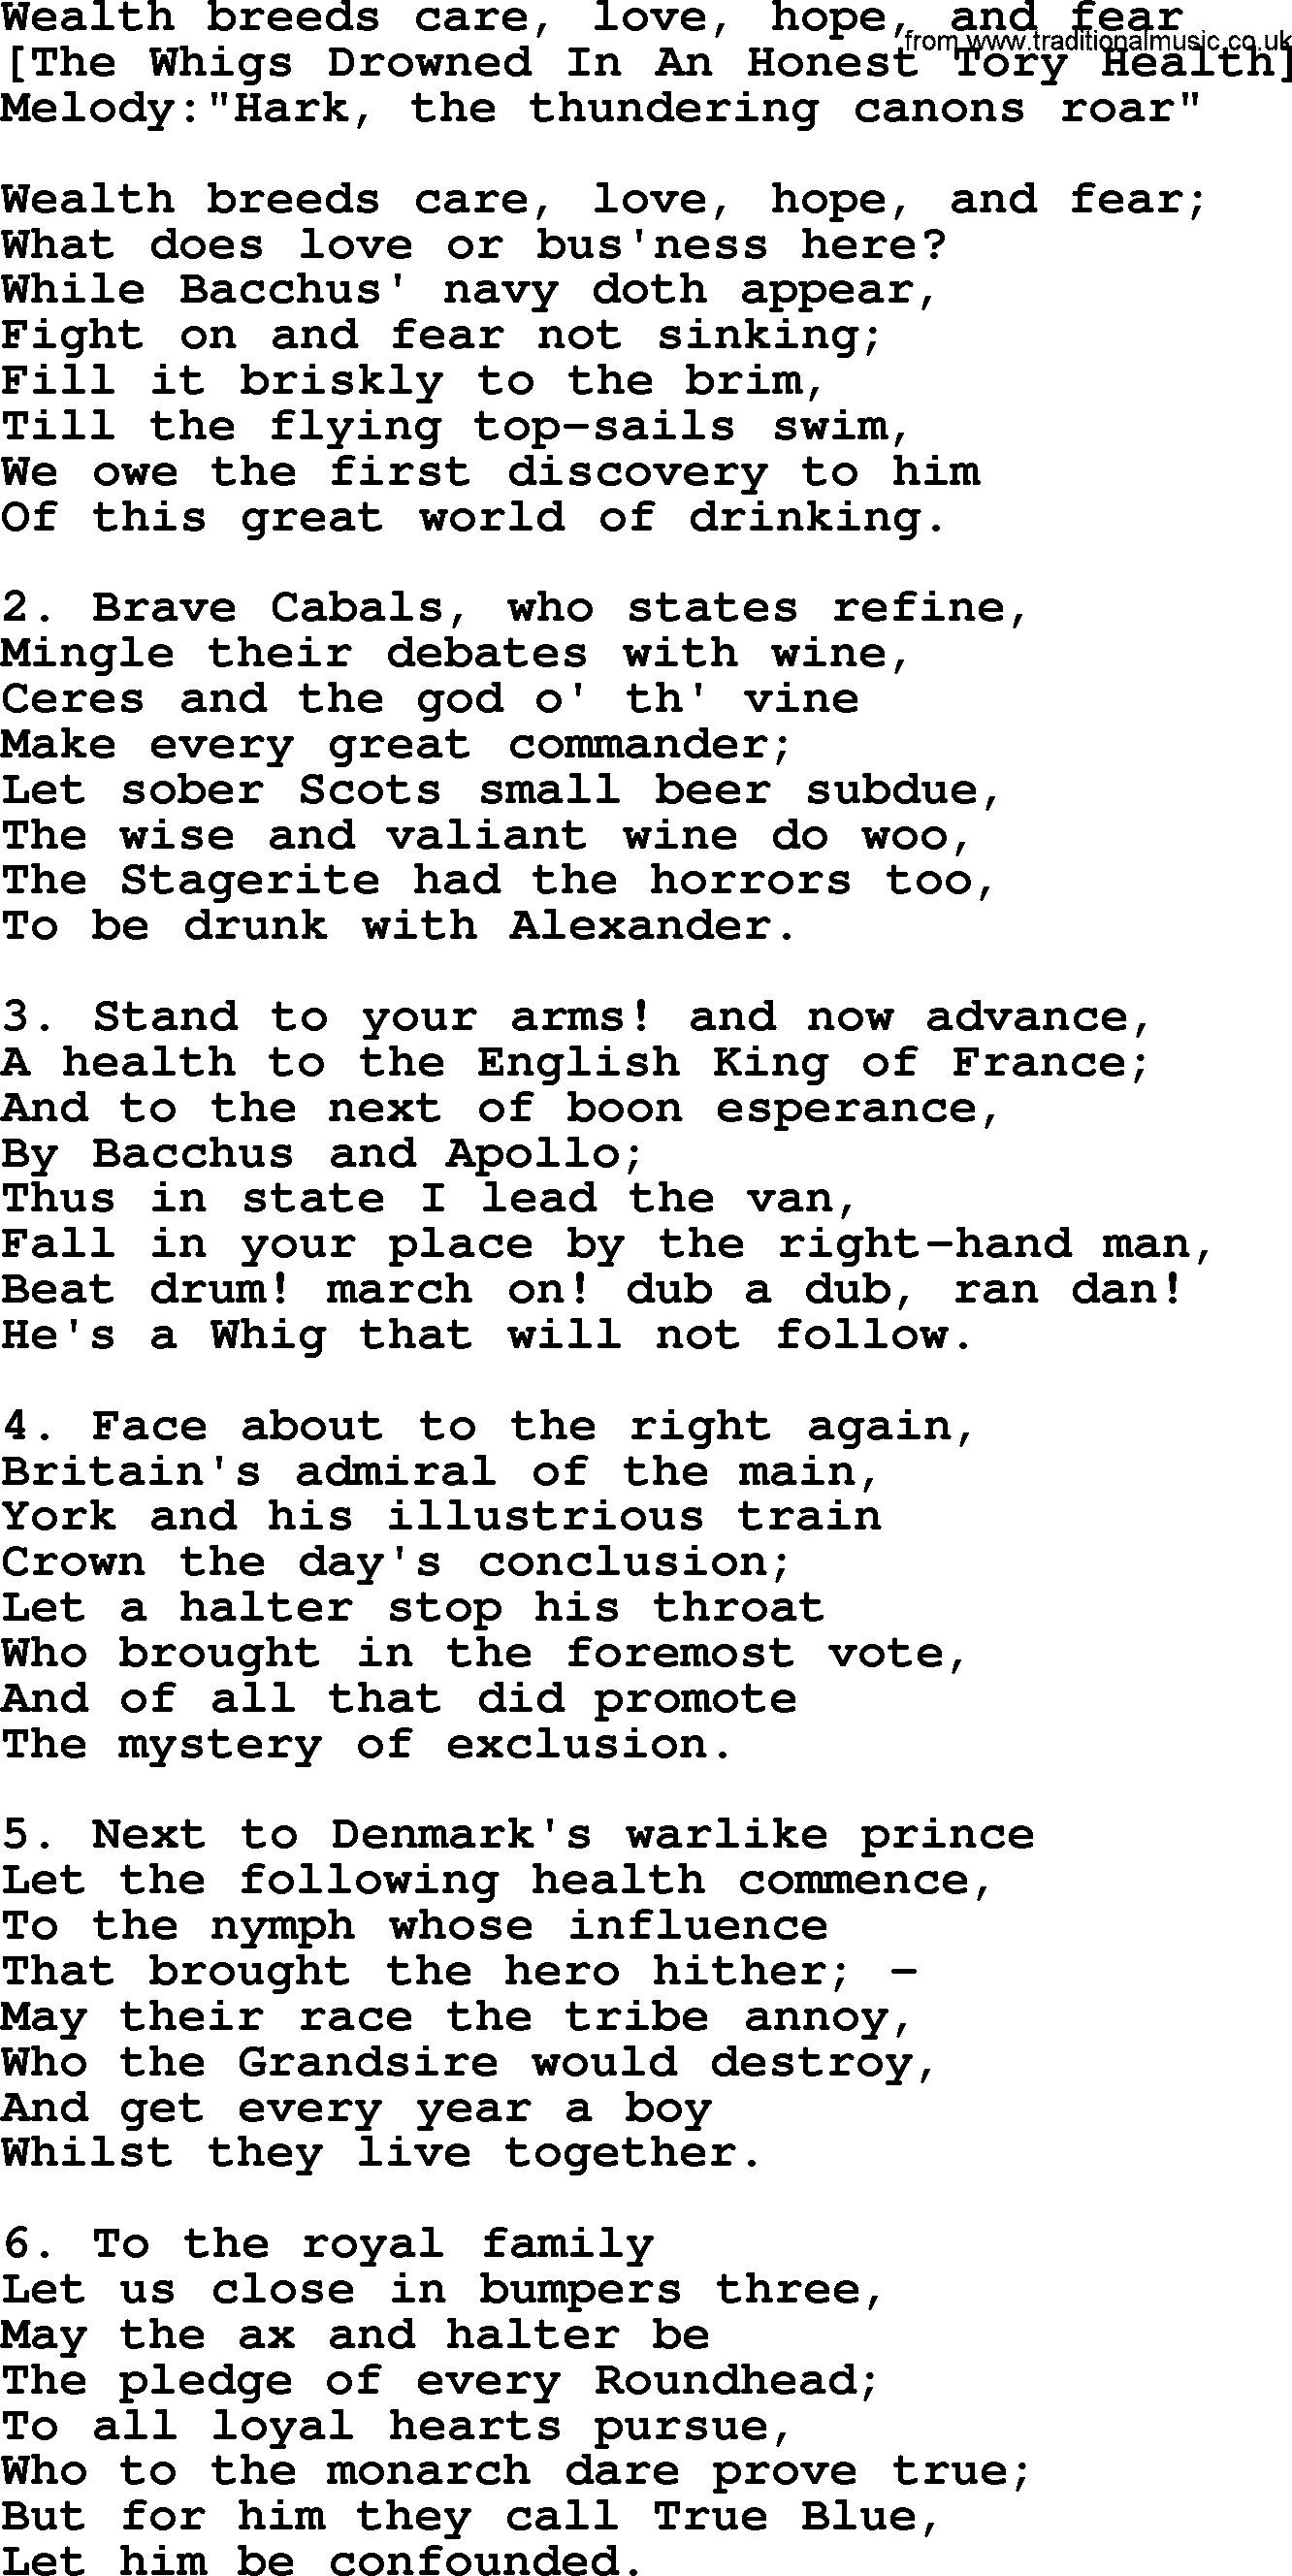 Old English Song: Wealth Breeds Care, Love, Hope, And Fear lyrics